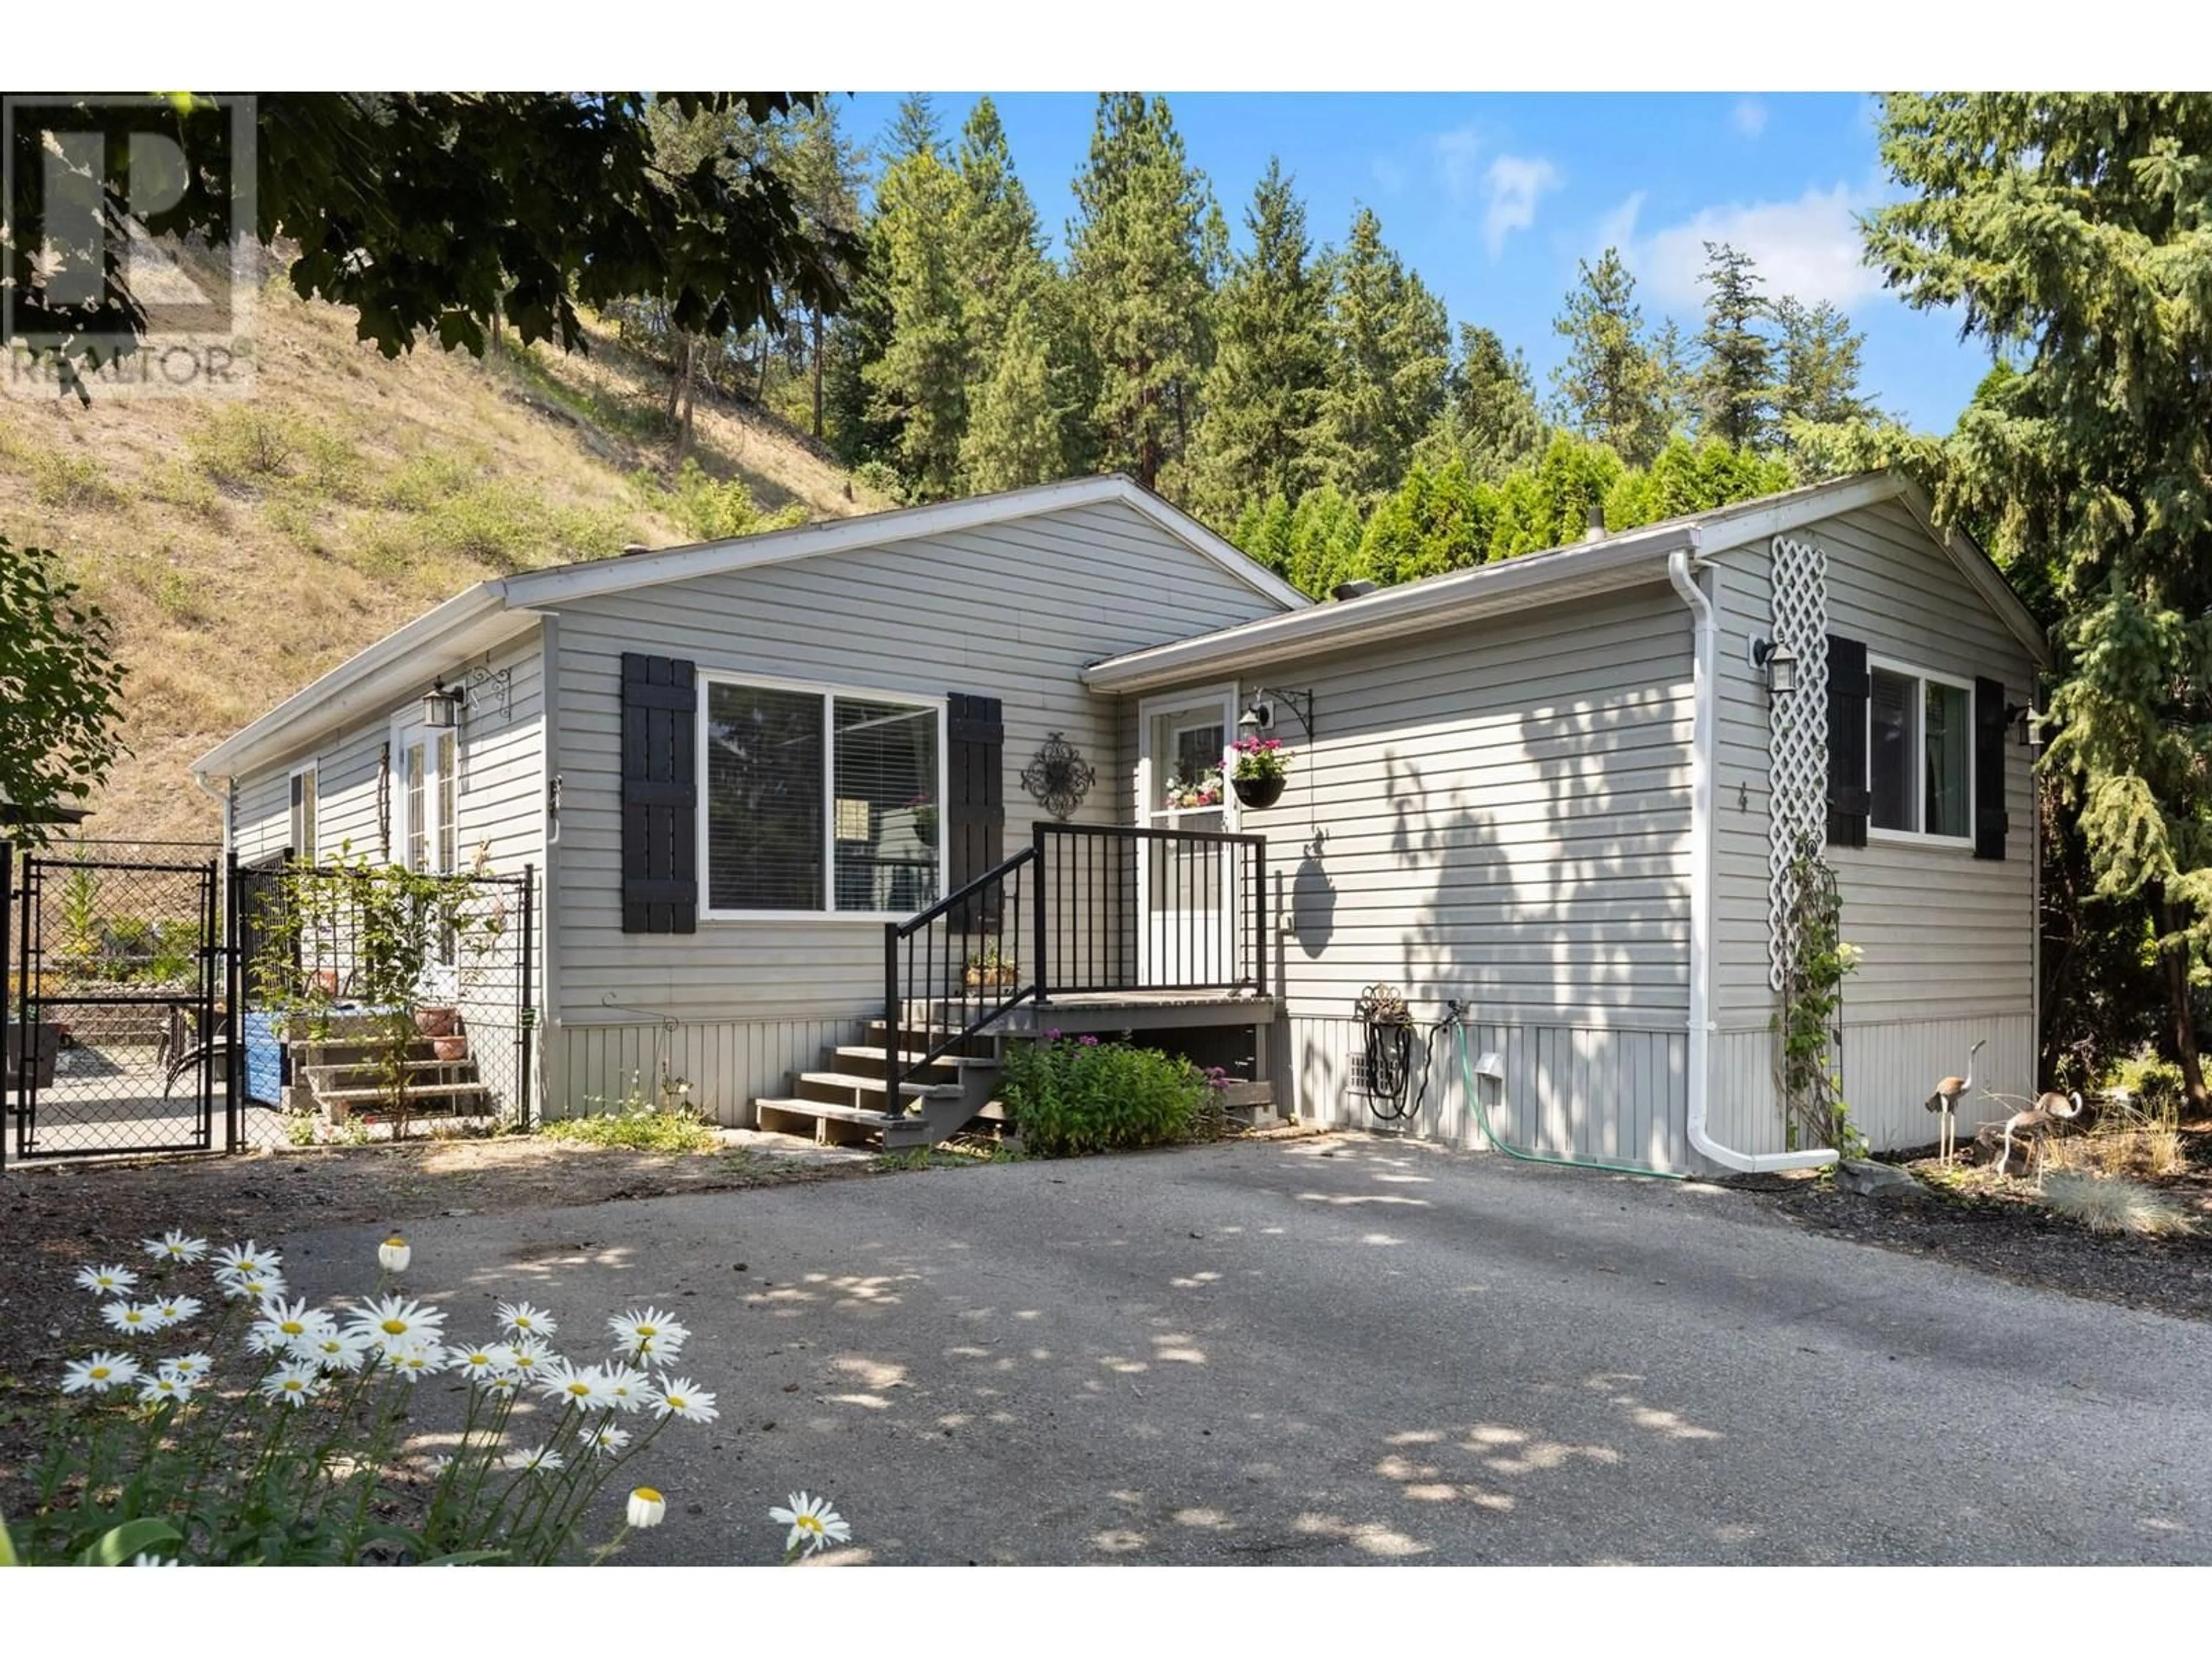 Home with vinyl exterior material for 1525 Westside Road Unit# 4, Kelowna British Columbia V1Z3Y3